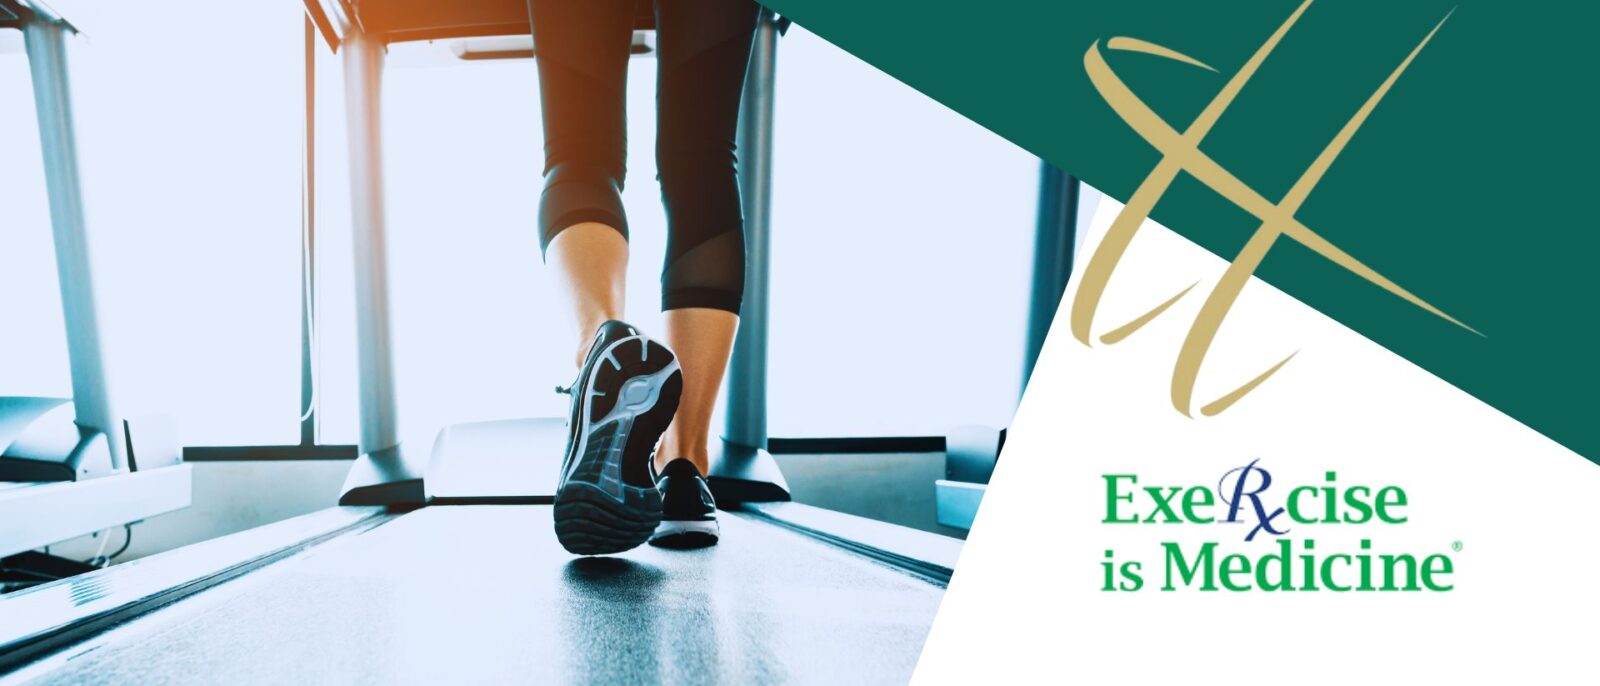 Harrisburg University is Recognized by Exercise is Medicine<sup>®</sup> for Efforts to Create Culture of Wellness on Campus